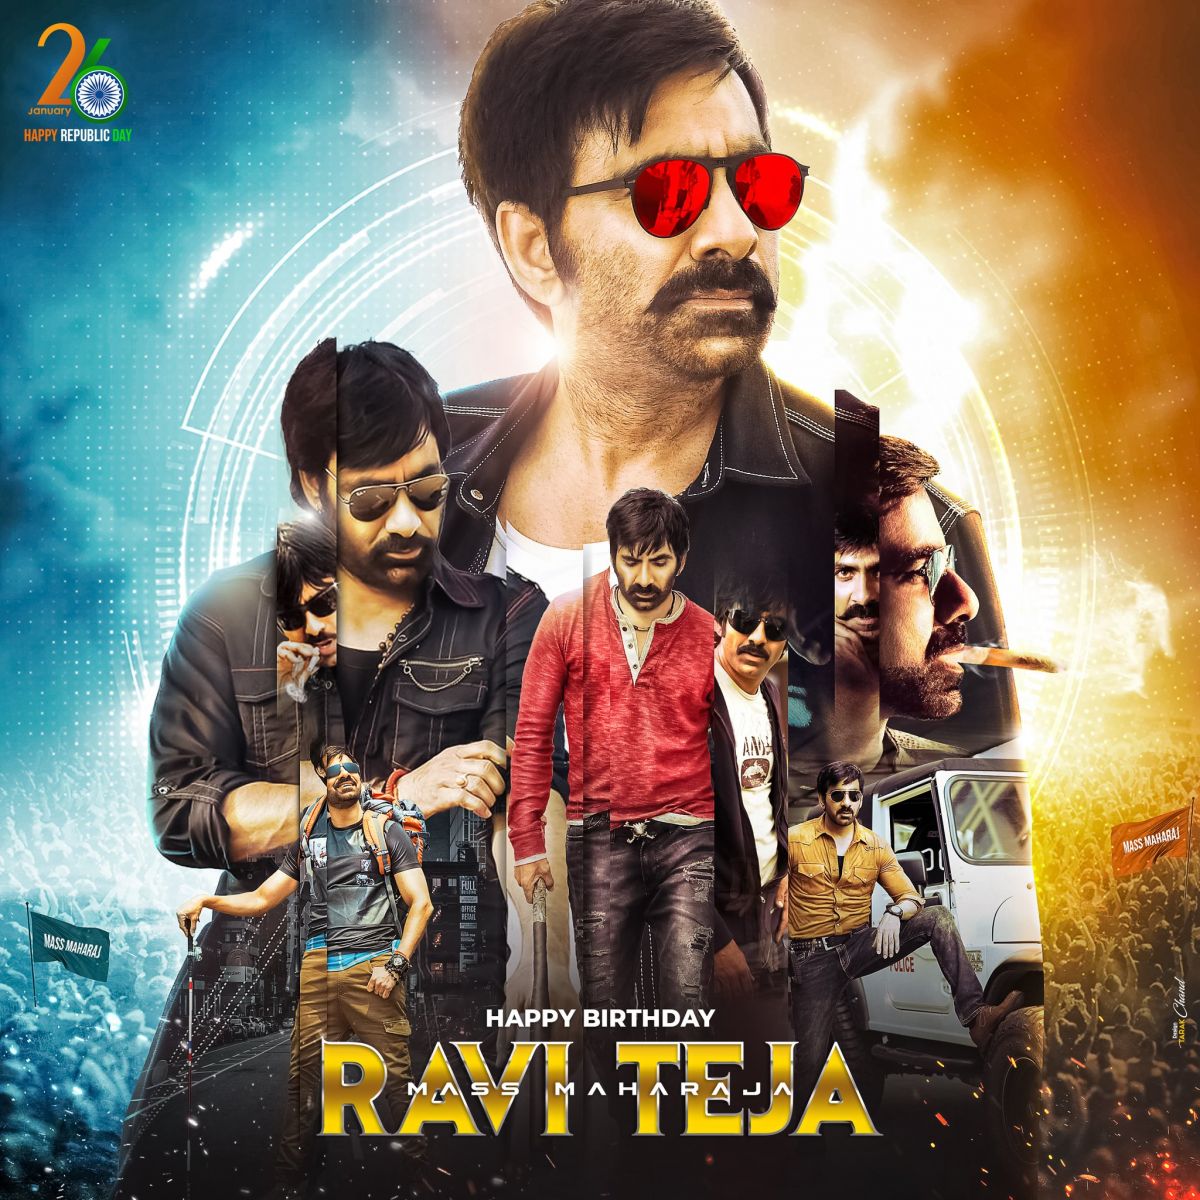 On Republic Day Special, Ravi Teja's next track from Khiladi will be out